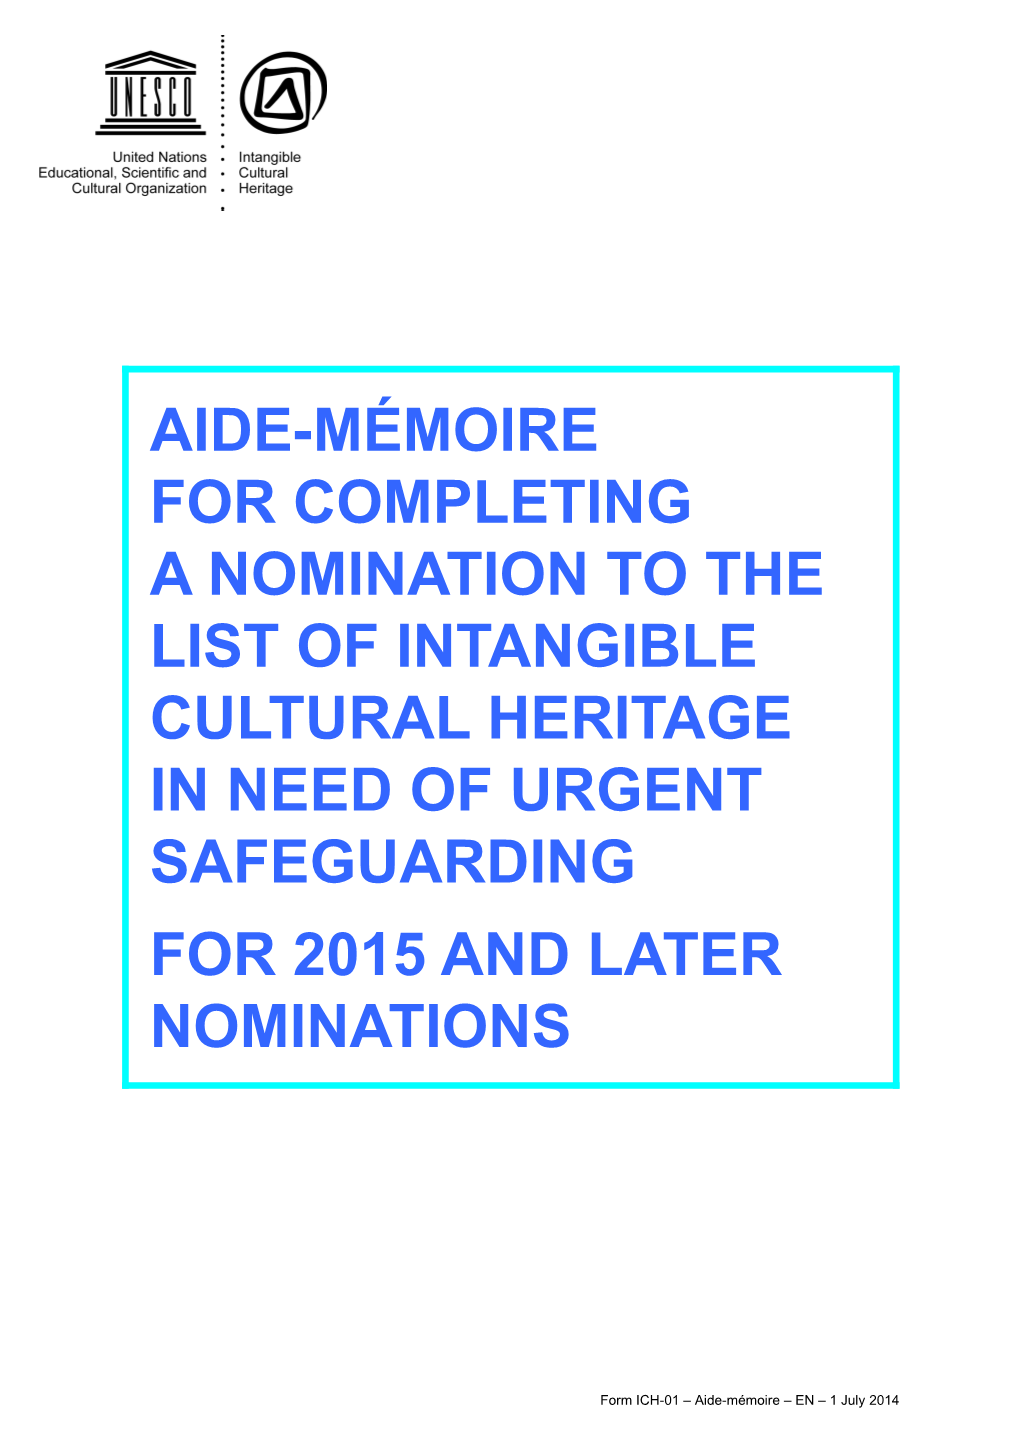 For 2015 and Later Nominations